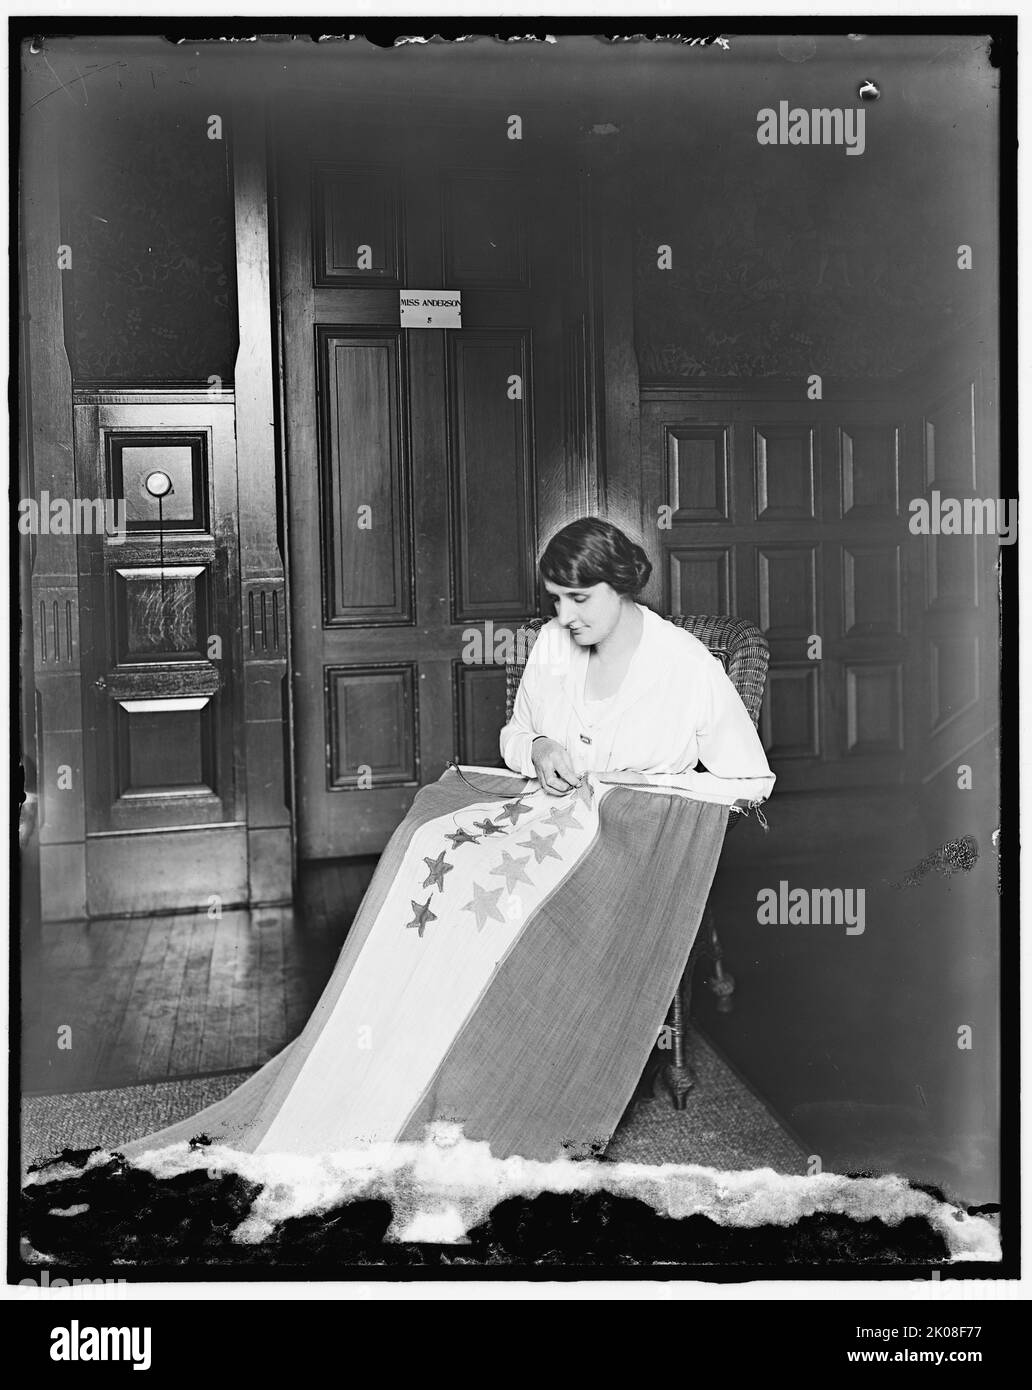 Sewing stars on suffrage flag, between 1910 and 1920. Women in the United States gained the legal right to vote in 1920, with the passing of the 19th Amendment. Stock Photo